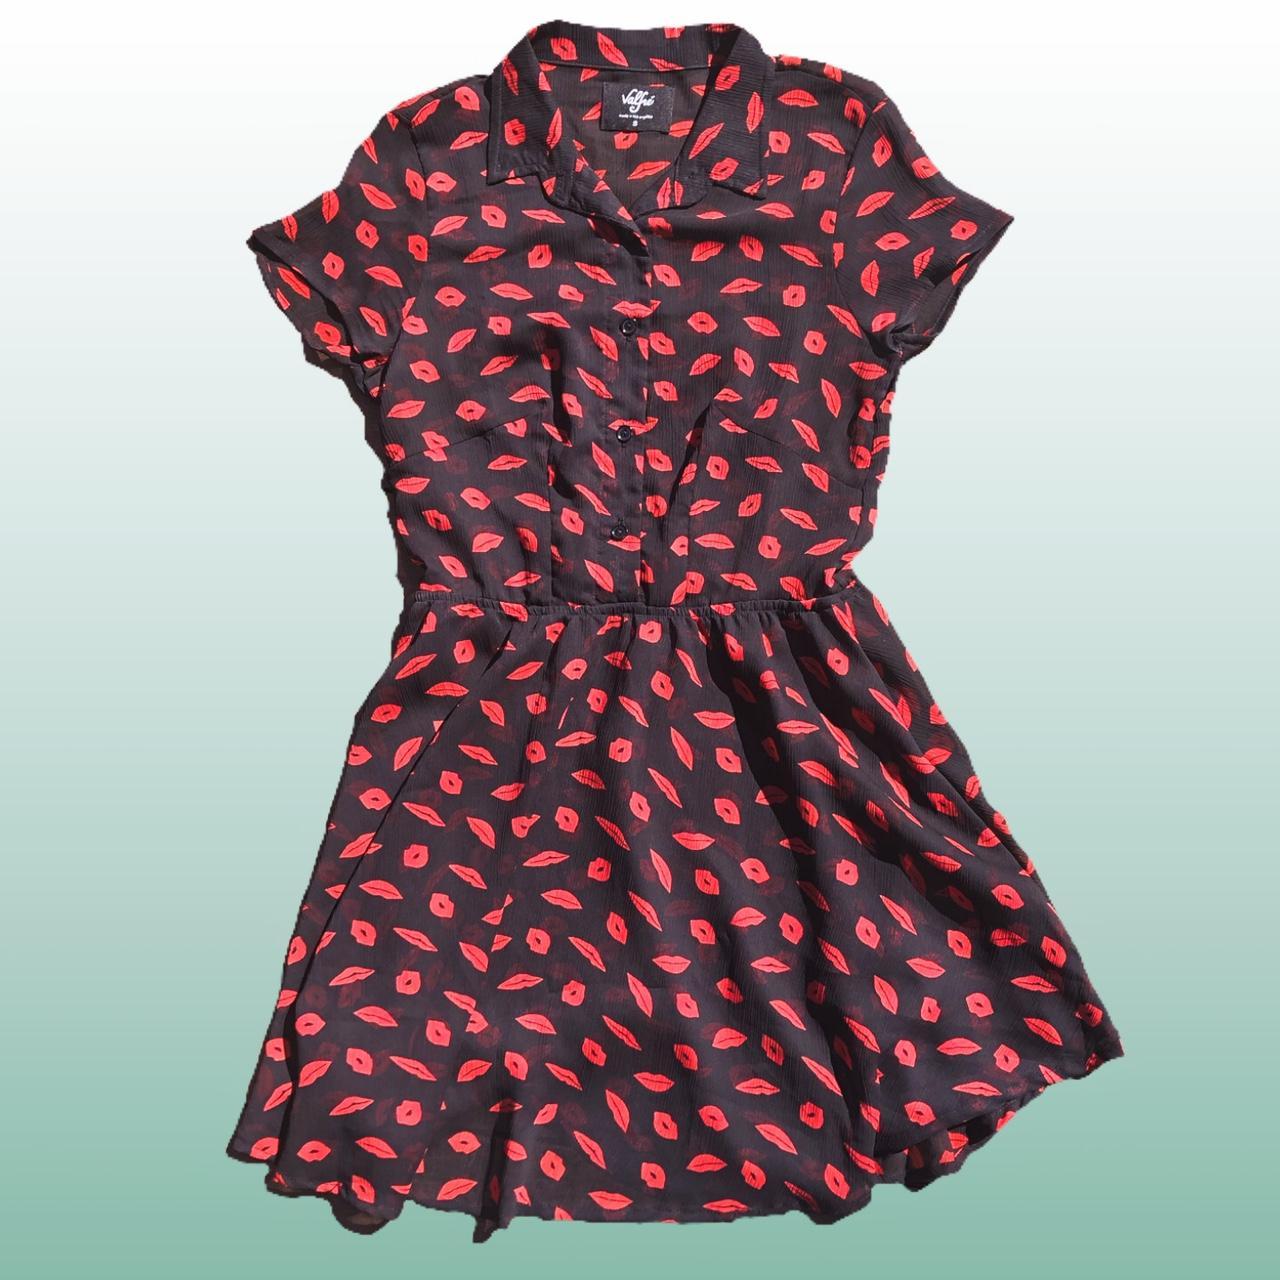 Product Image 1 - Lips dress
Size: Small 
Brand: Valfre

Tags

#lips